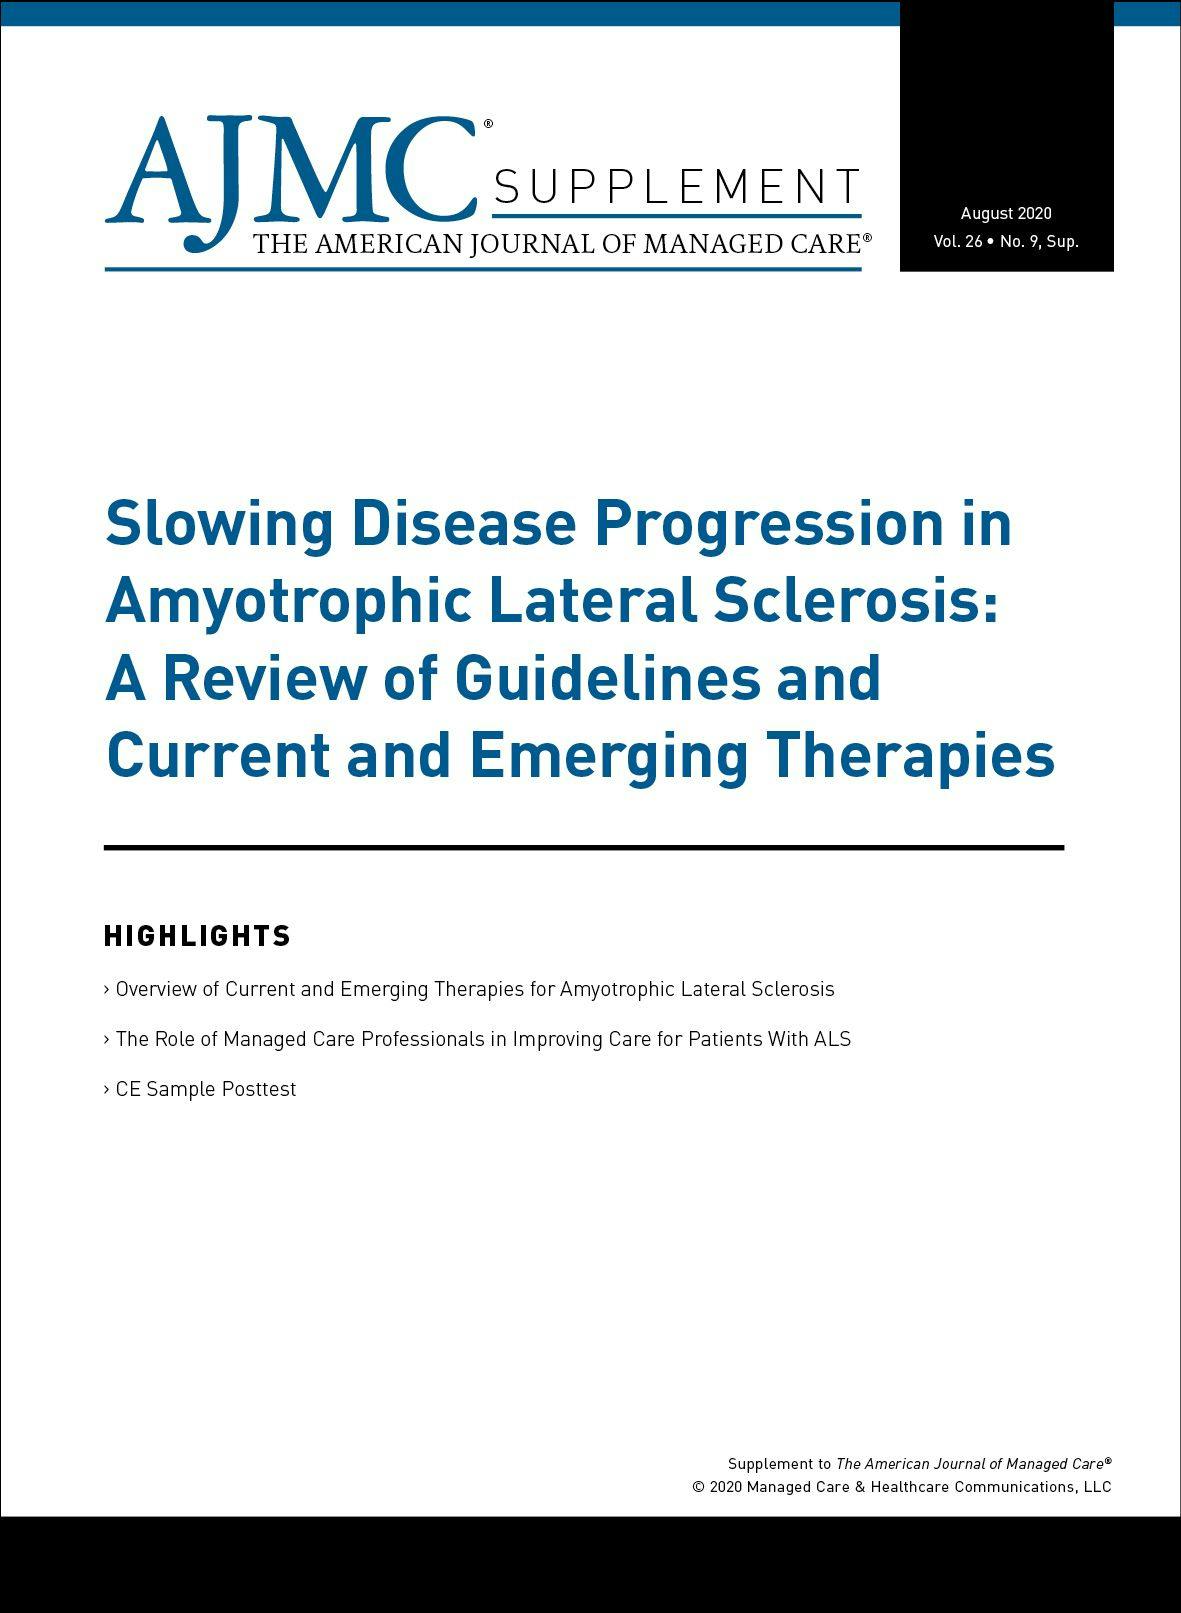 Slowing Disease Progression in Amyotrophic Lateral Sclerosis: A Review of Guidelines and Current and Emerging Therapies